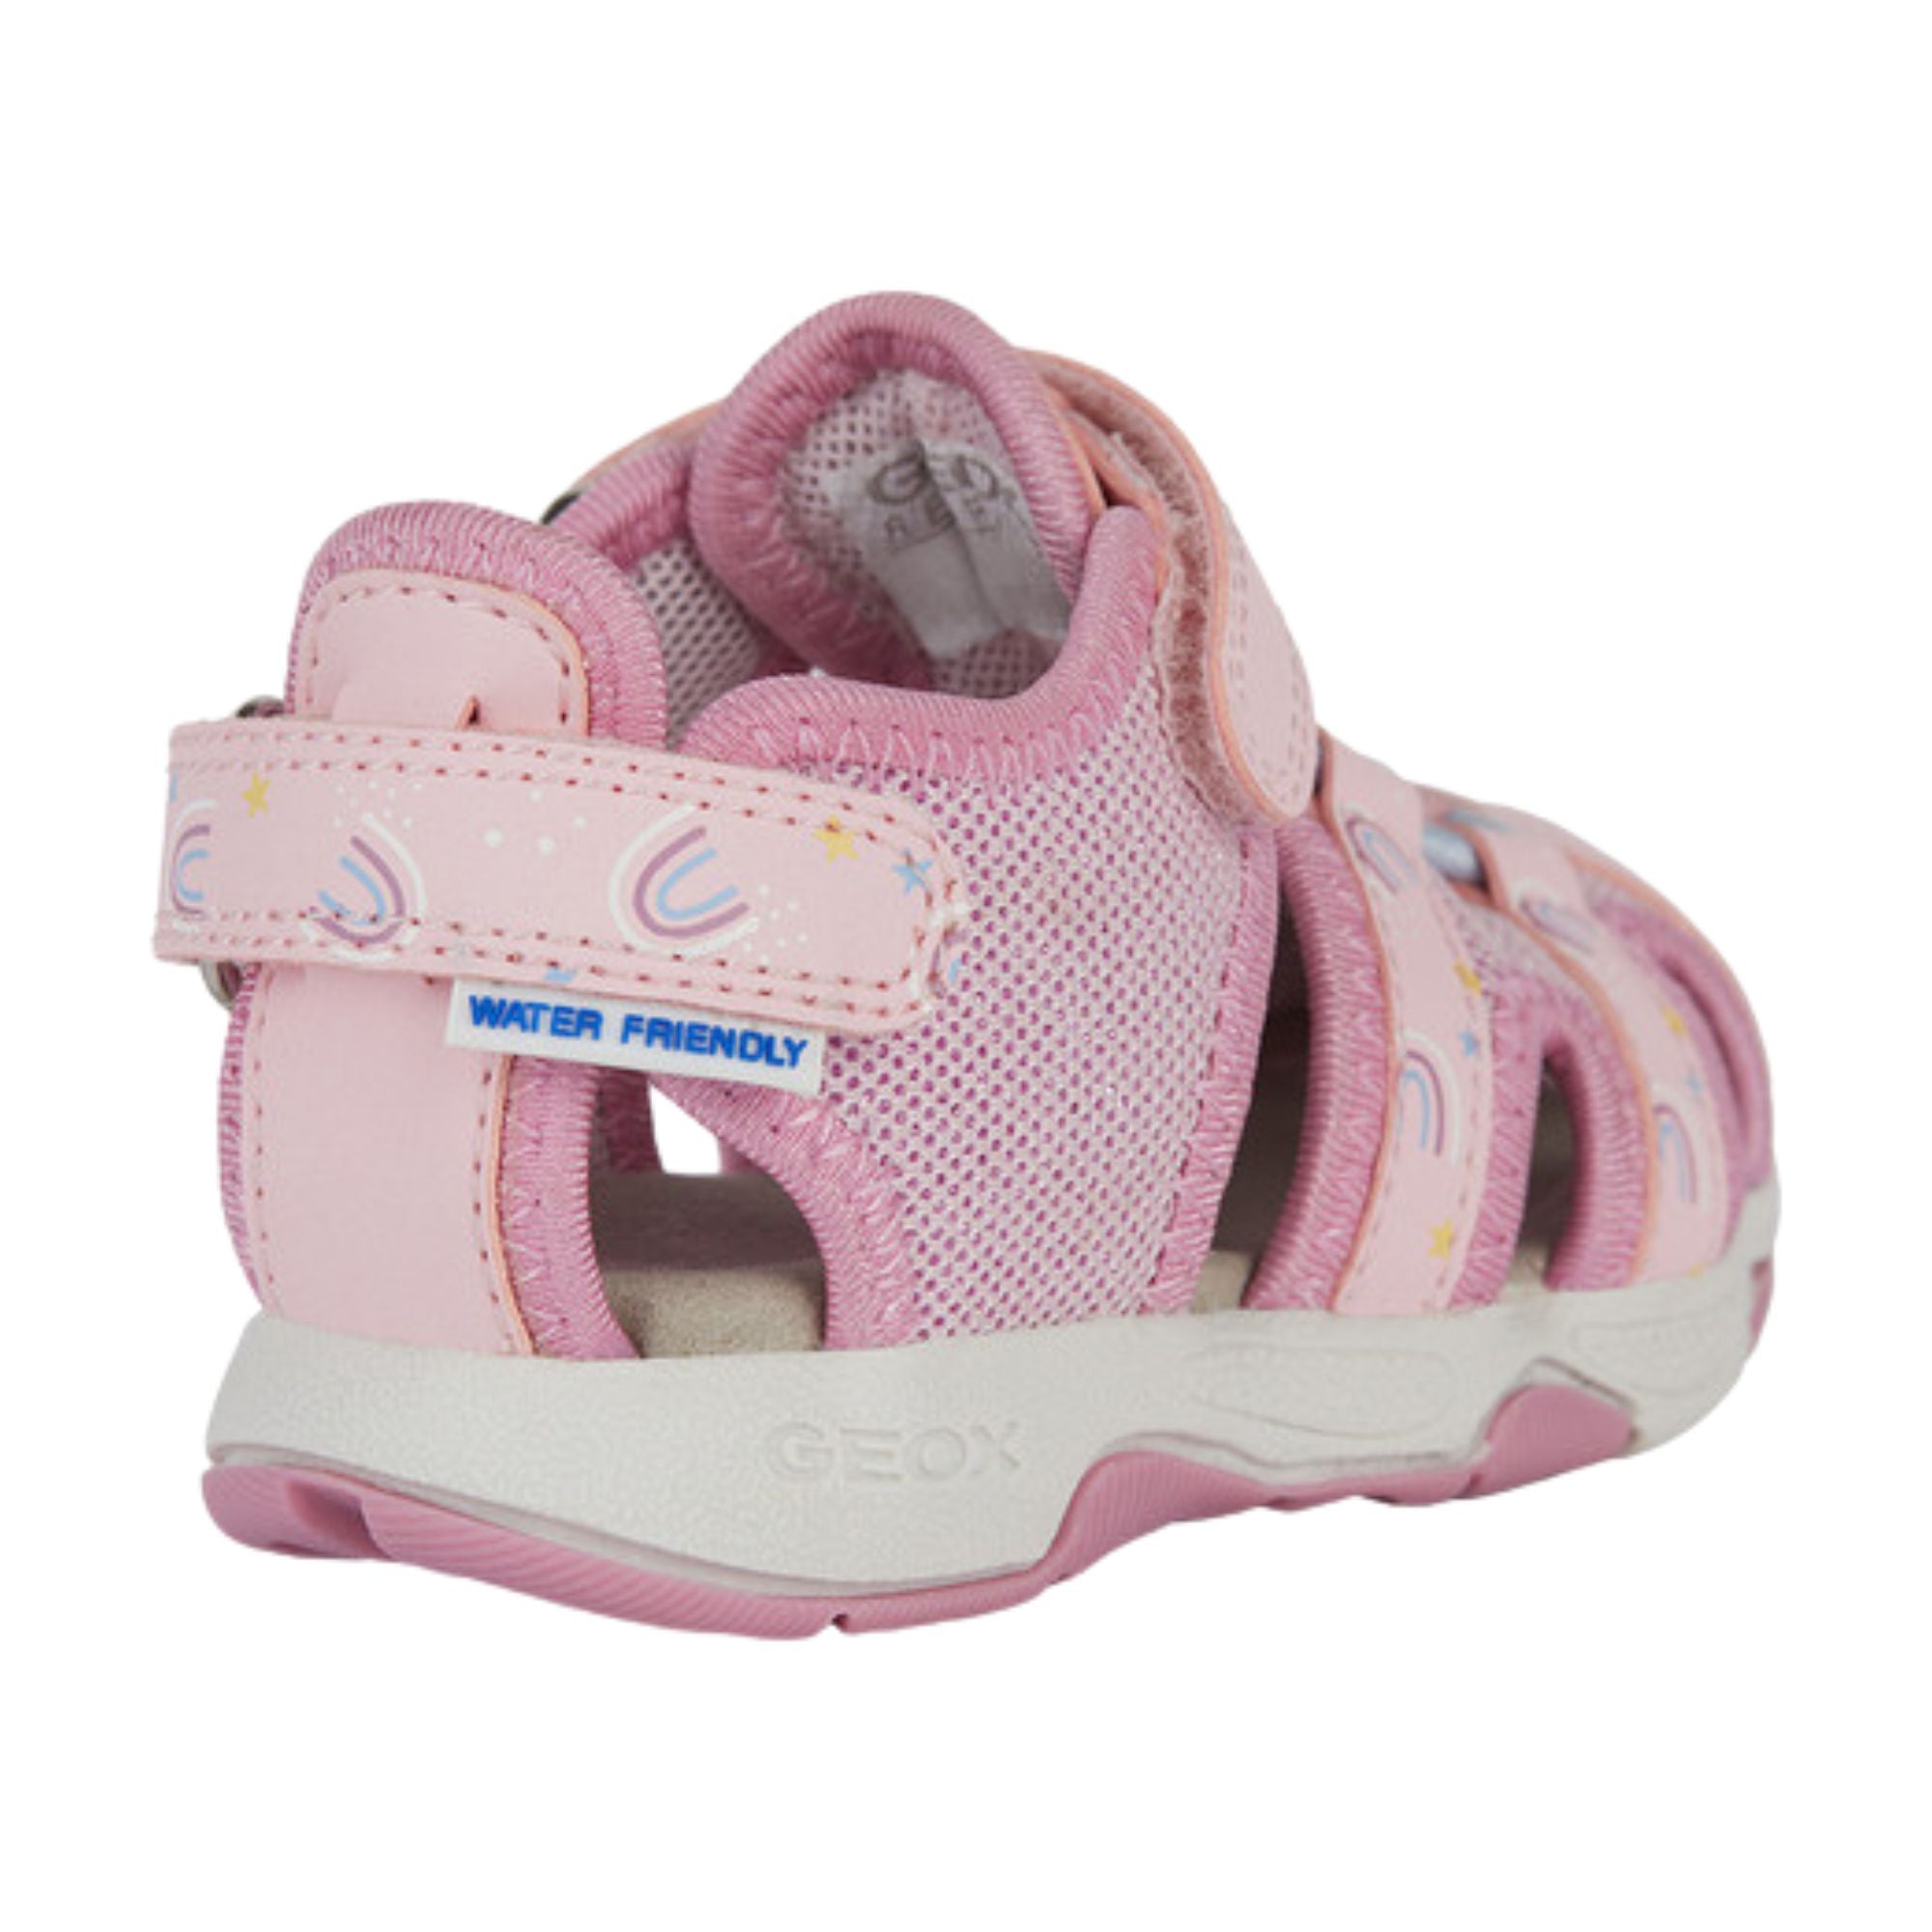 Geox Baby Girl Multy Toddler Pink Sandals